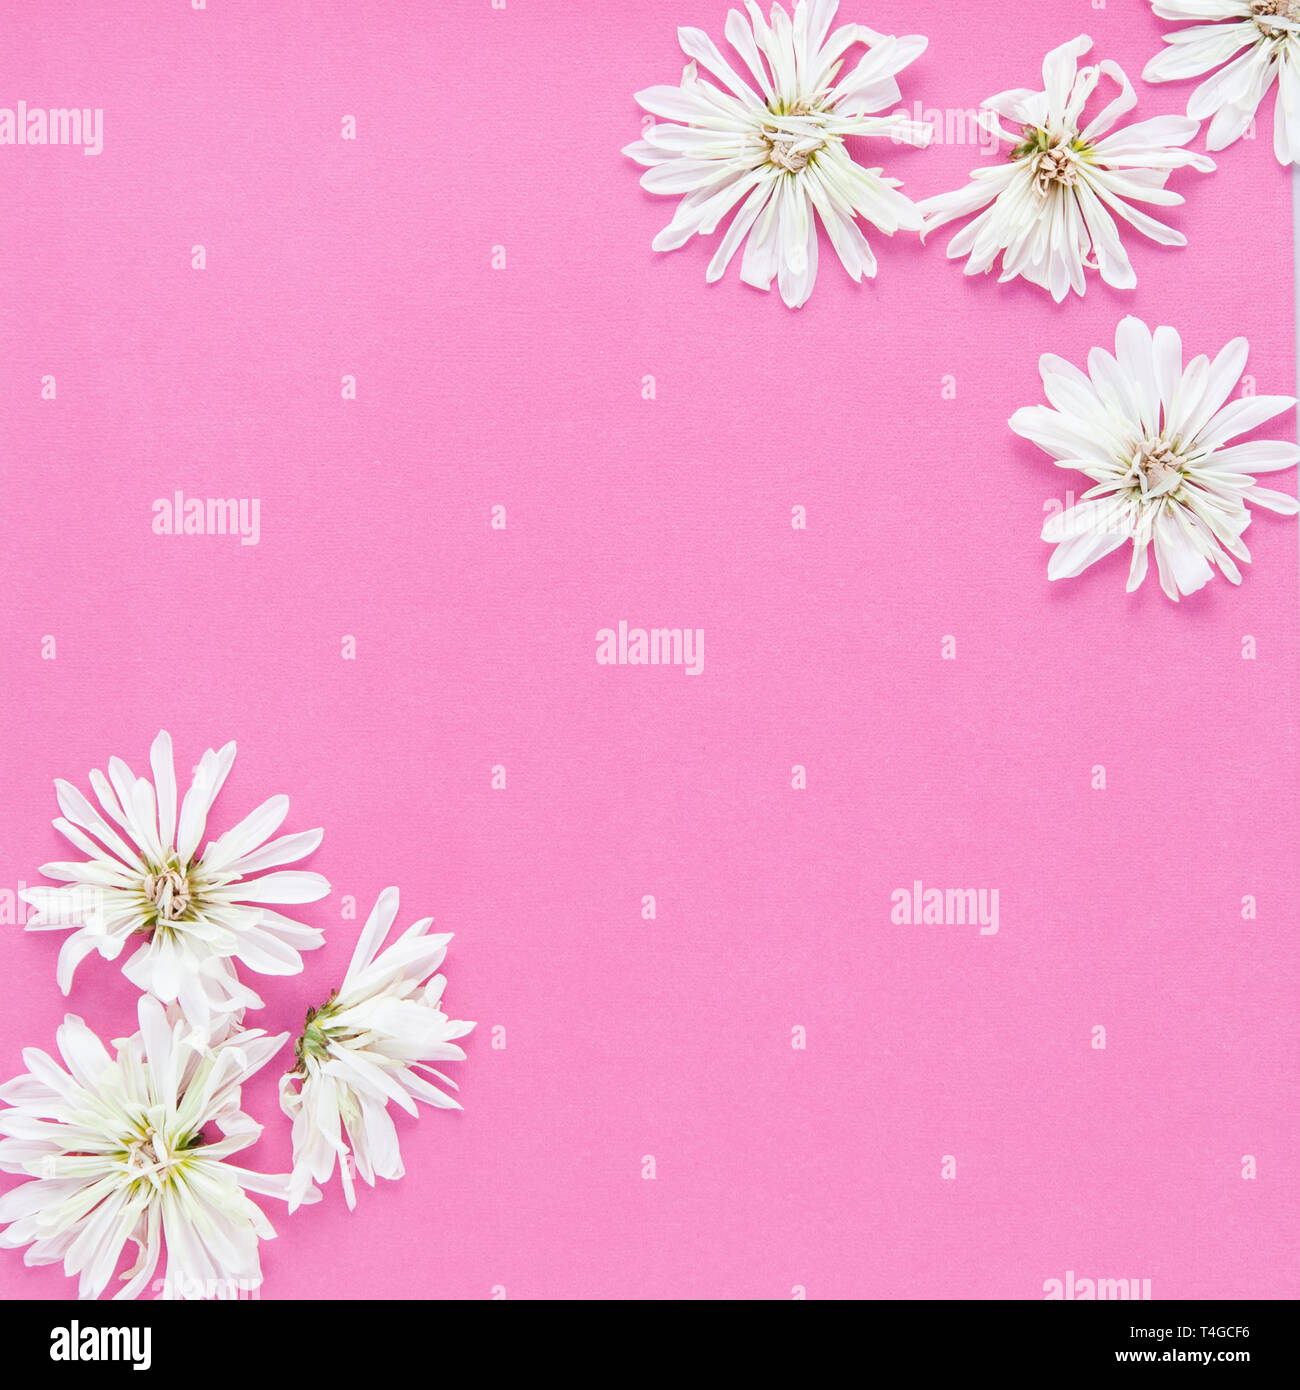 white  chrysanthemum flowers on a bright pink back ground with copy space Stock Photo